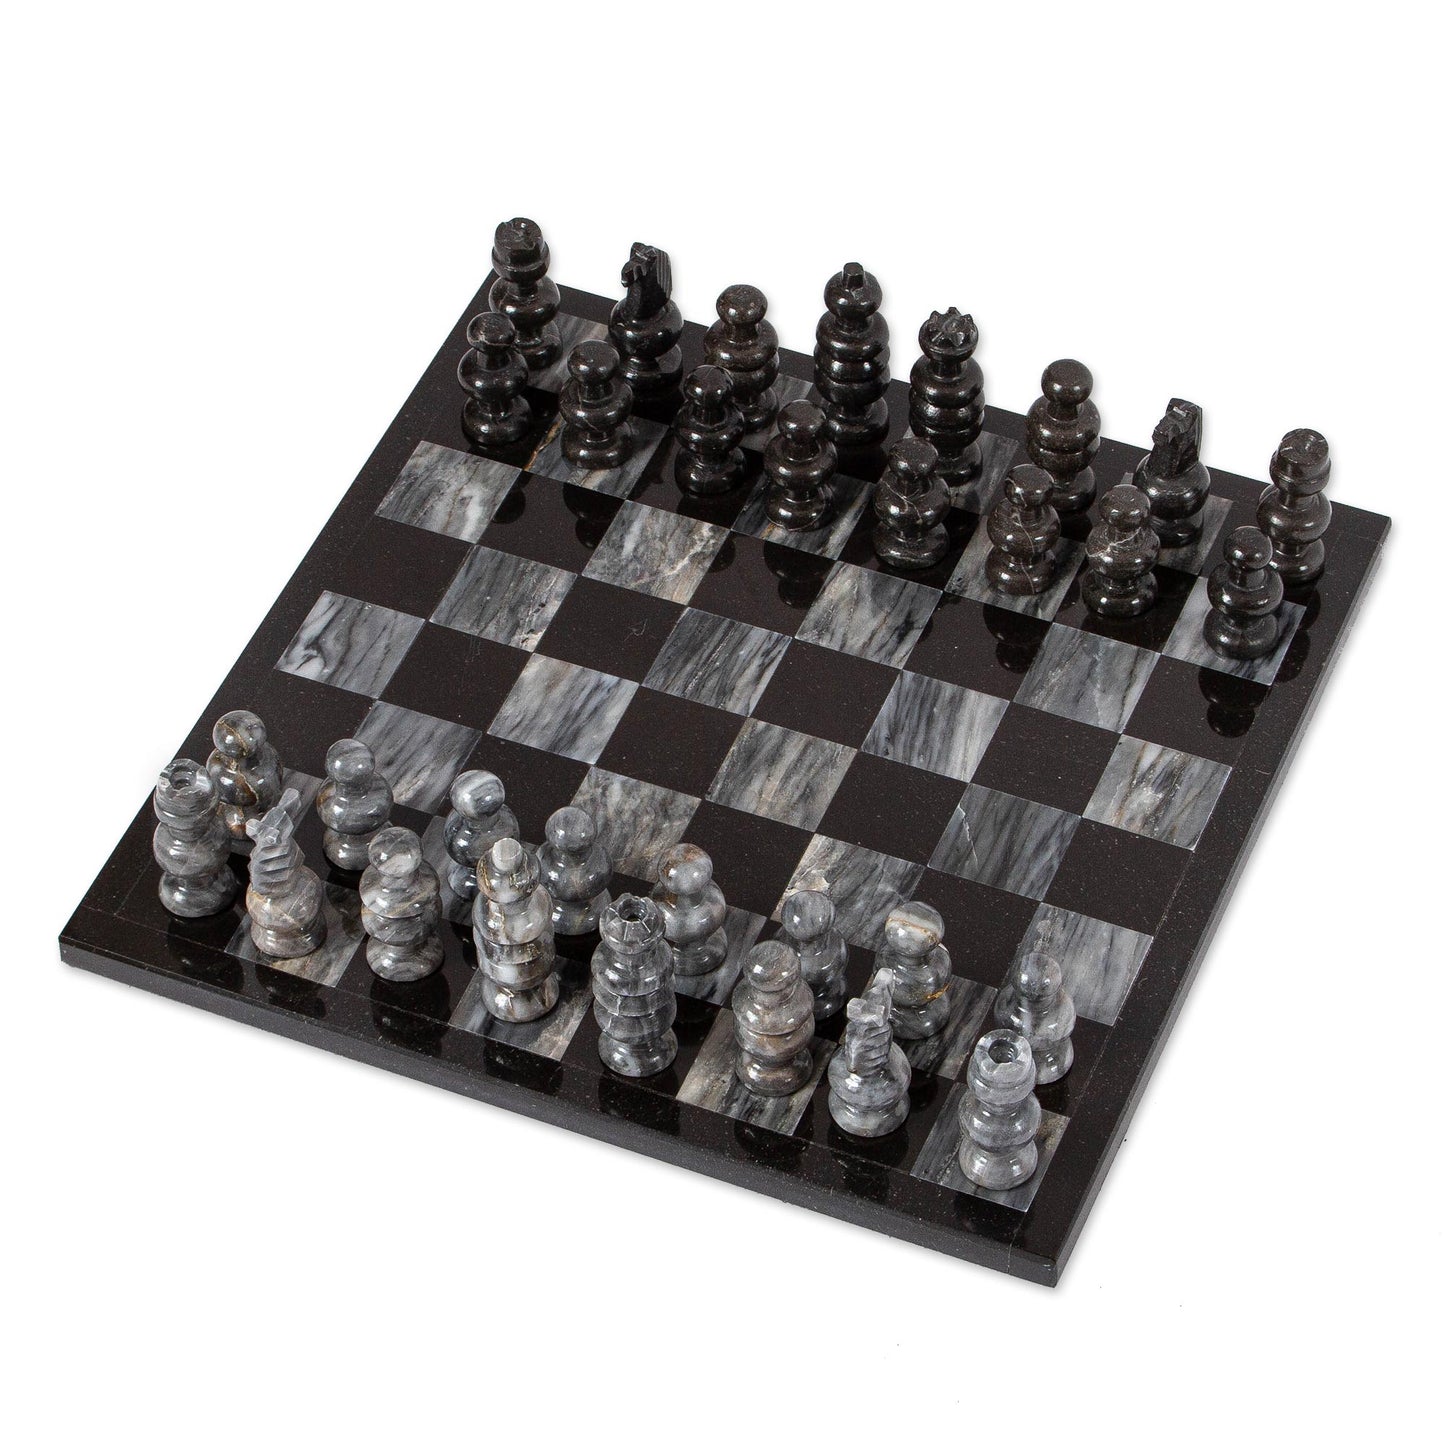 Check in Gray Handcrafted Mexican Marble Chess Set Game